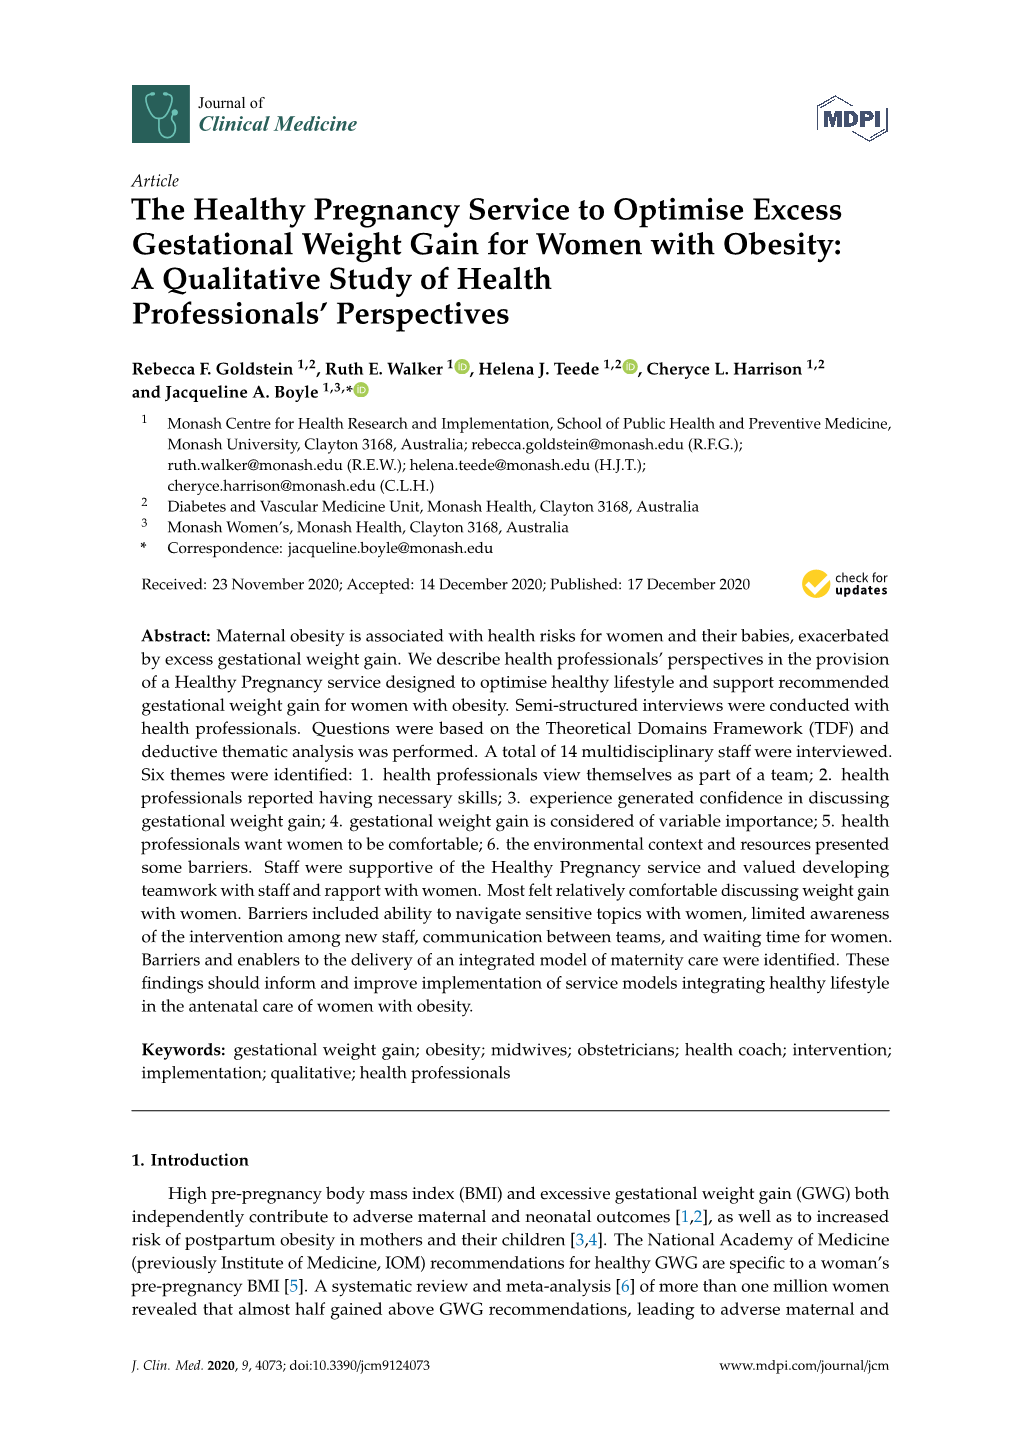 The Healthy Pregnancy Service to Optimise Excess Gestational Weight Gain for Women with Obesity: a Qualitative Study of Health Professionals’ Perspectives